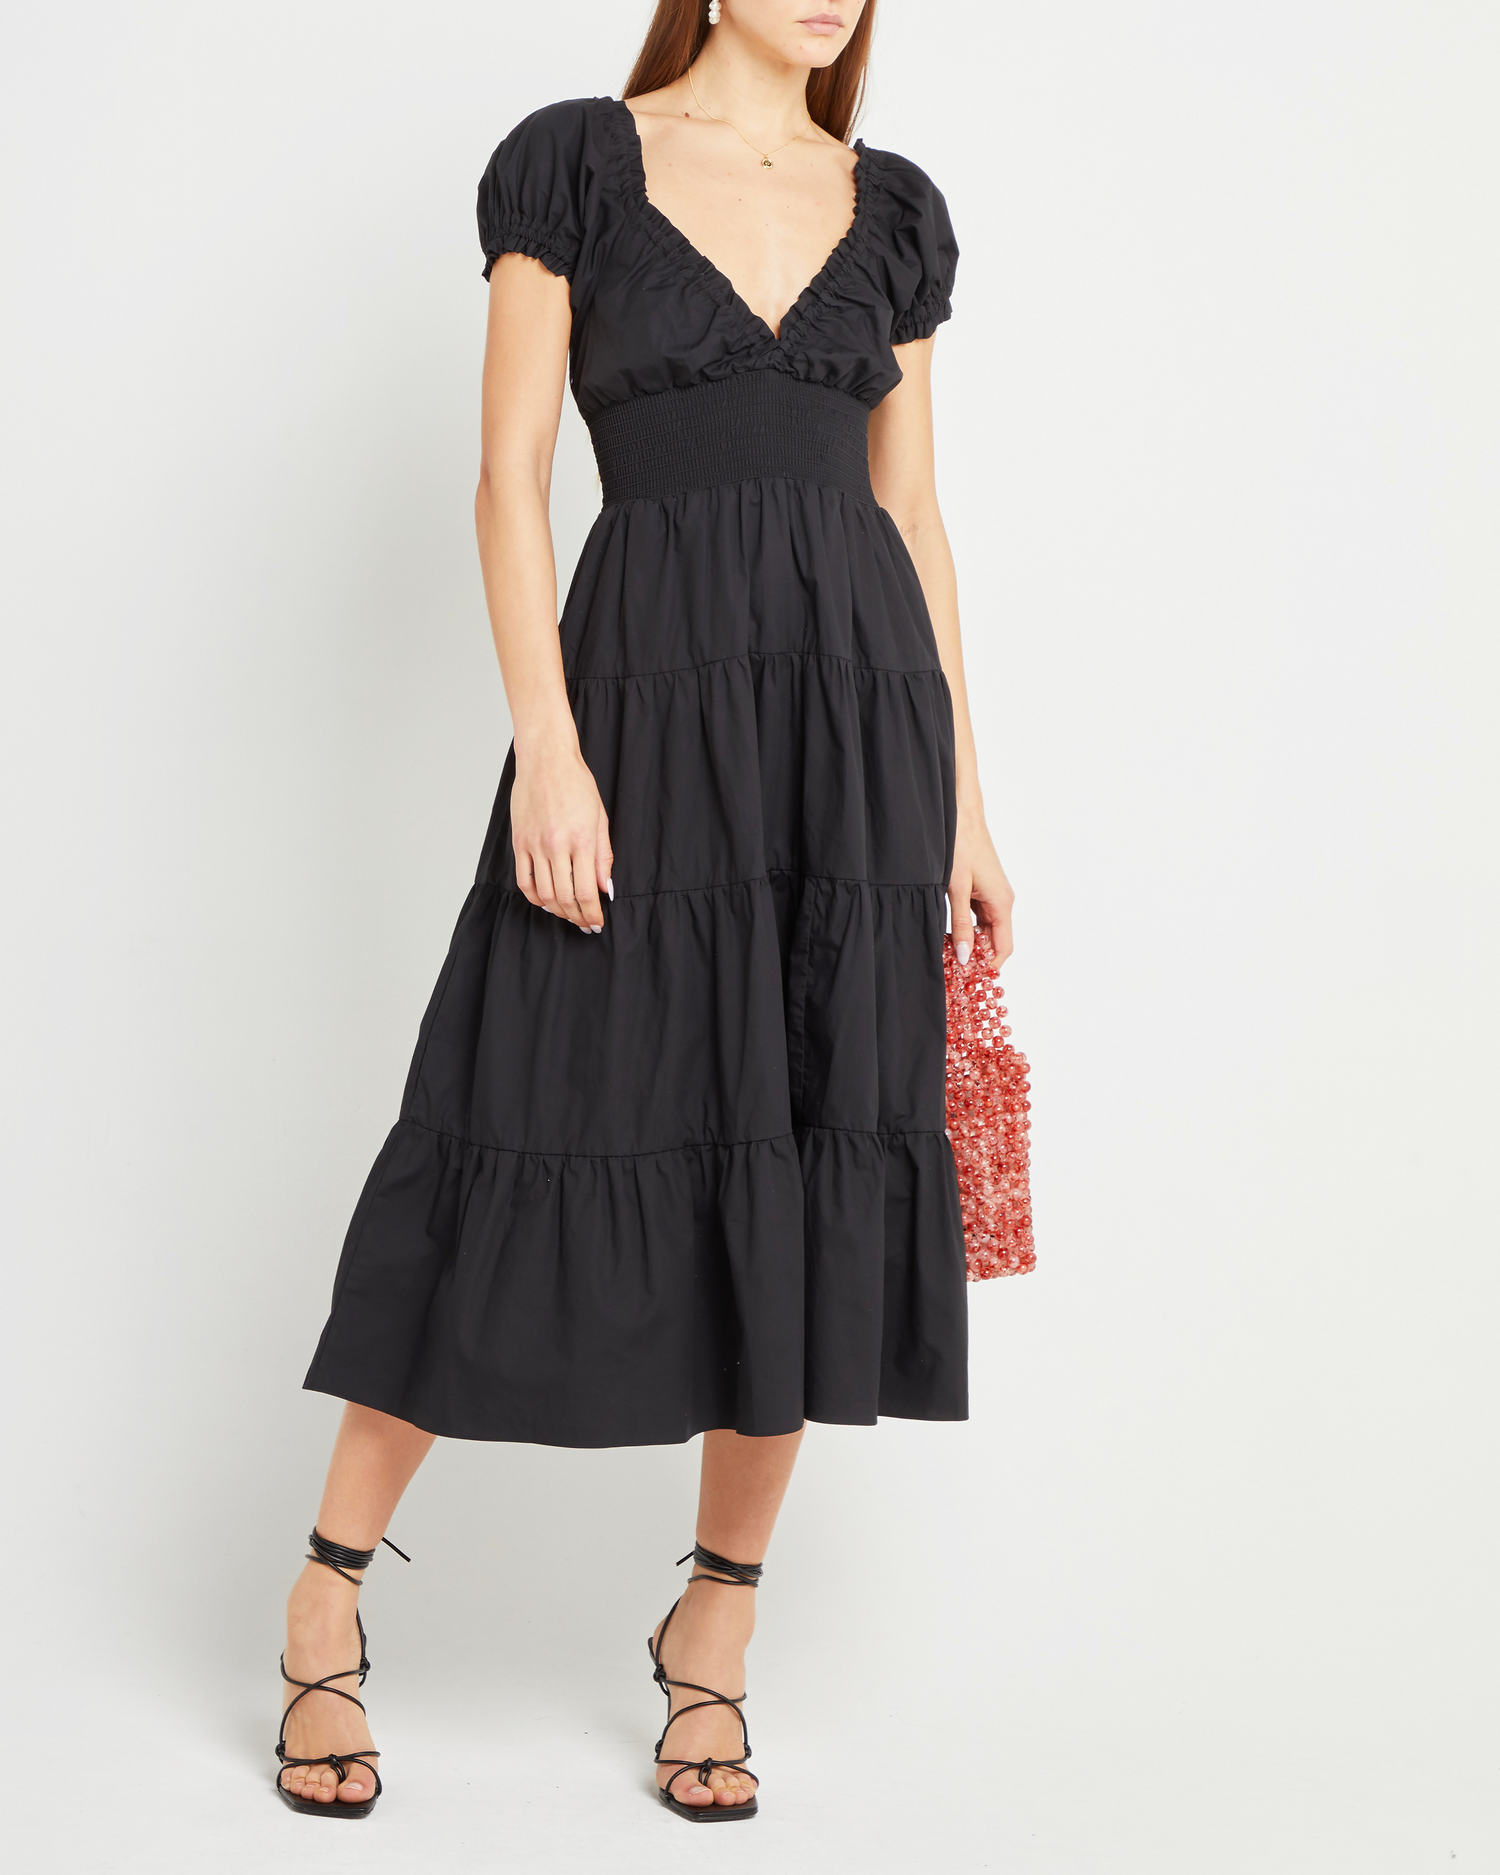 Fifth image of Cotton Delia Dress, a black midi dress, V-neck, ruffle, cap sleeves, short sleeves, tiered